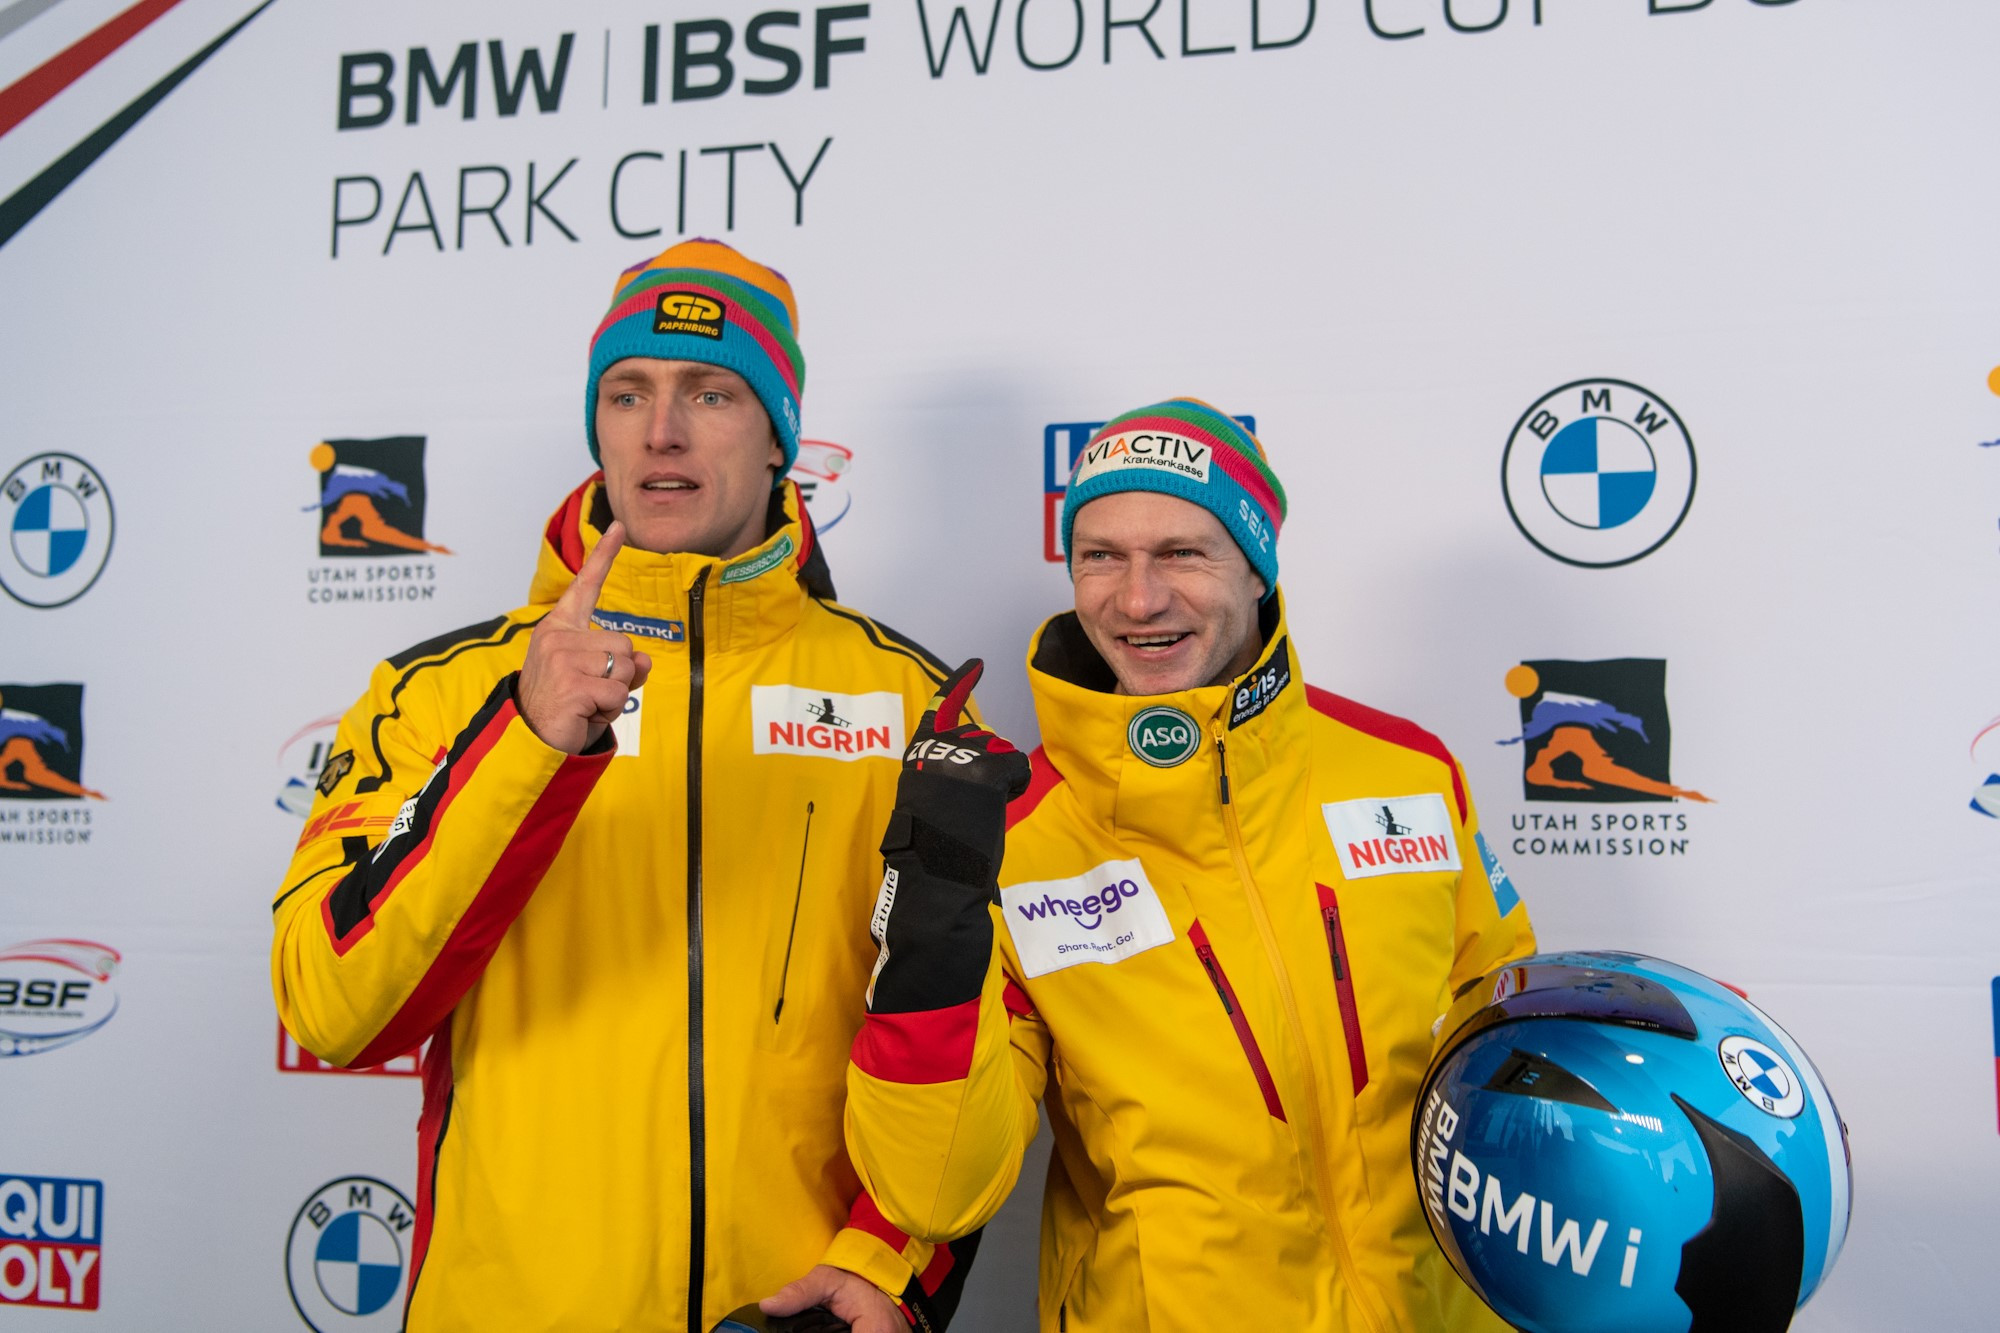 Olympic and world champion Francesco Friedrich of Germany won his second IBSF World Cup gold this season in  Park City ©Getty Images